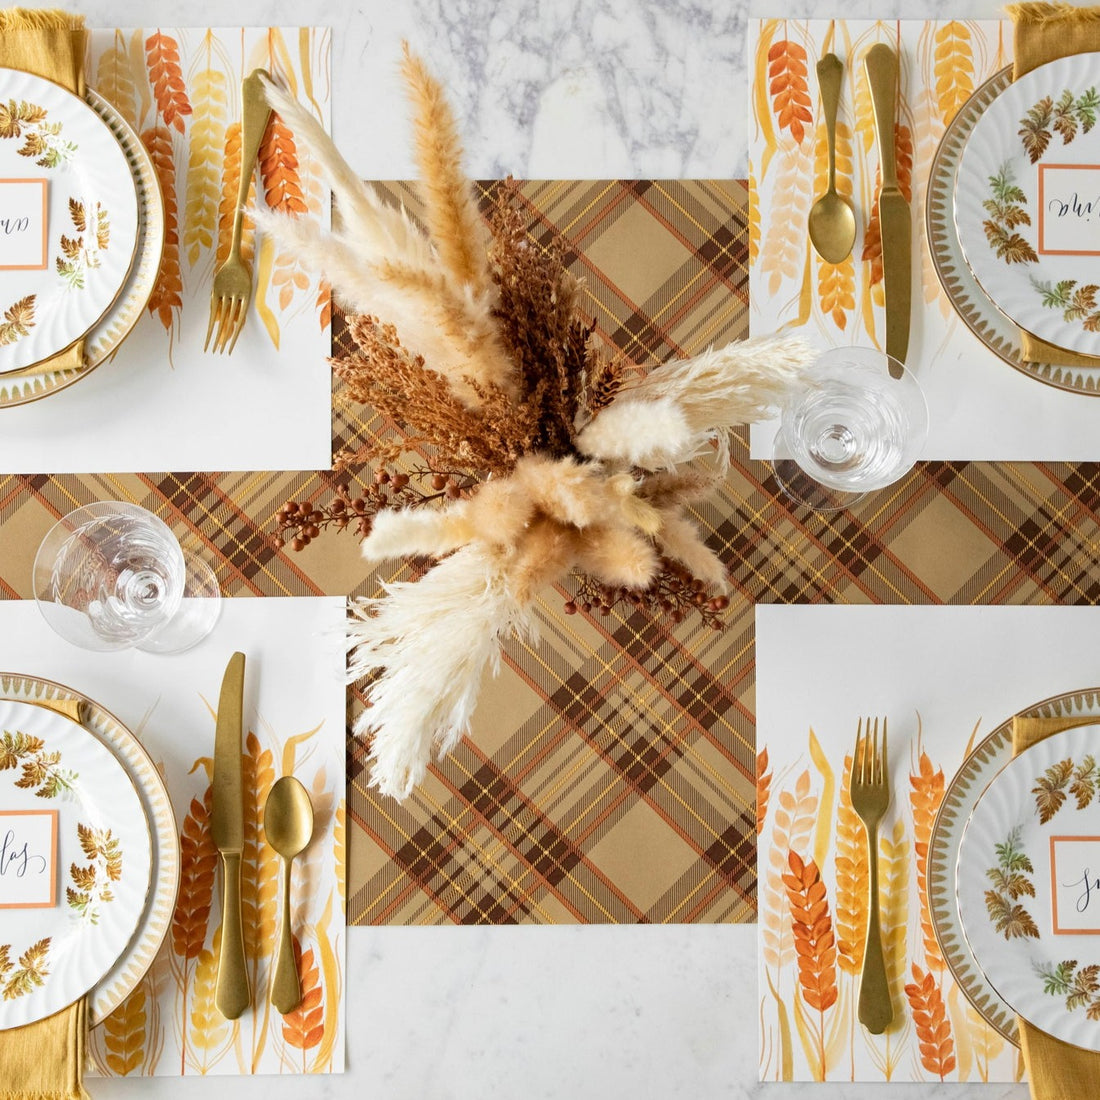 Thanksgiving table setting with the Hester &amp; Cook Autumn Plaid Runner, gold and brown plates, and silverware, featuring autumn colors.